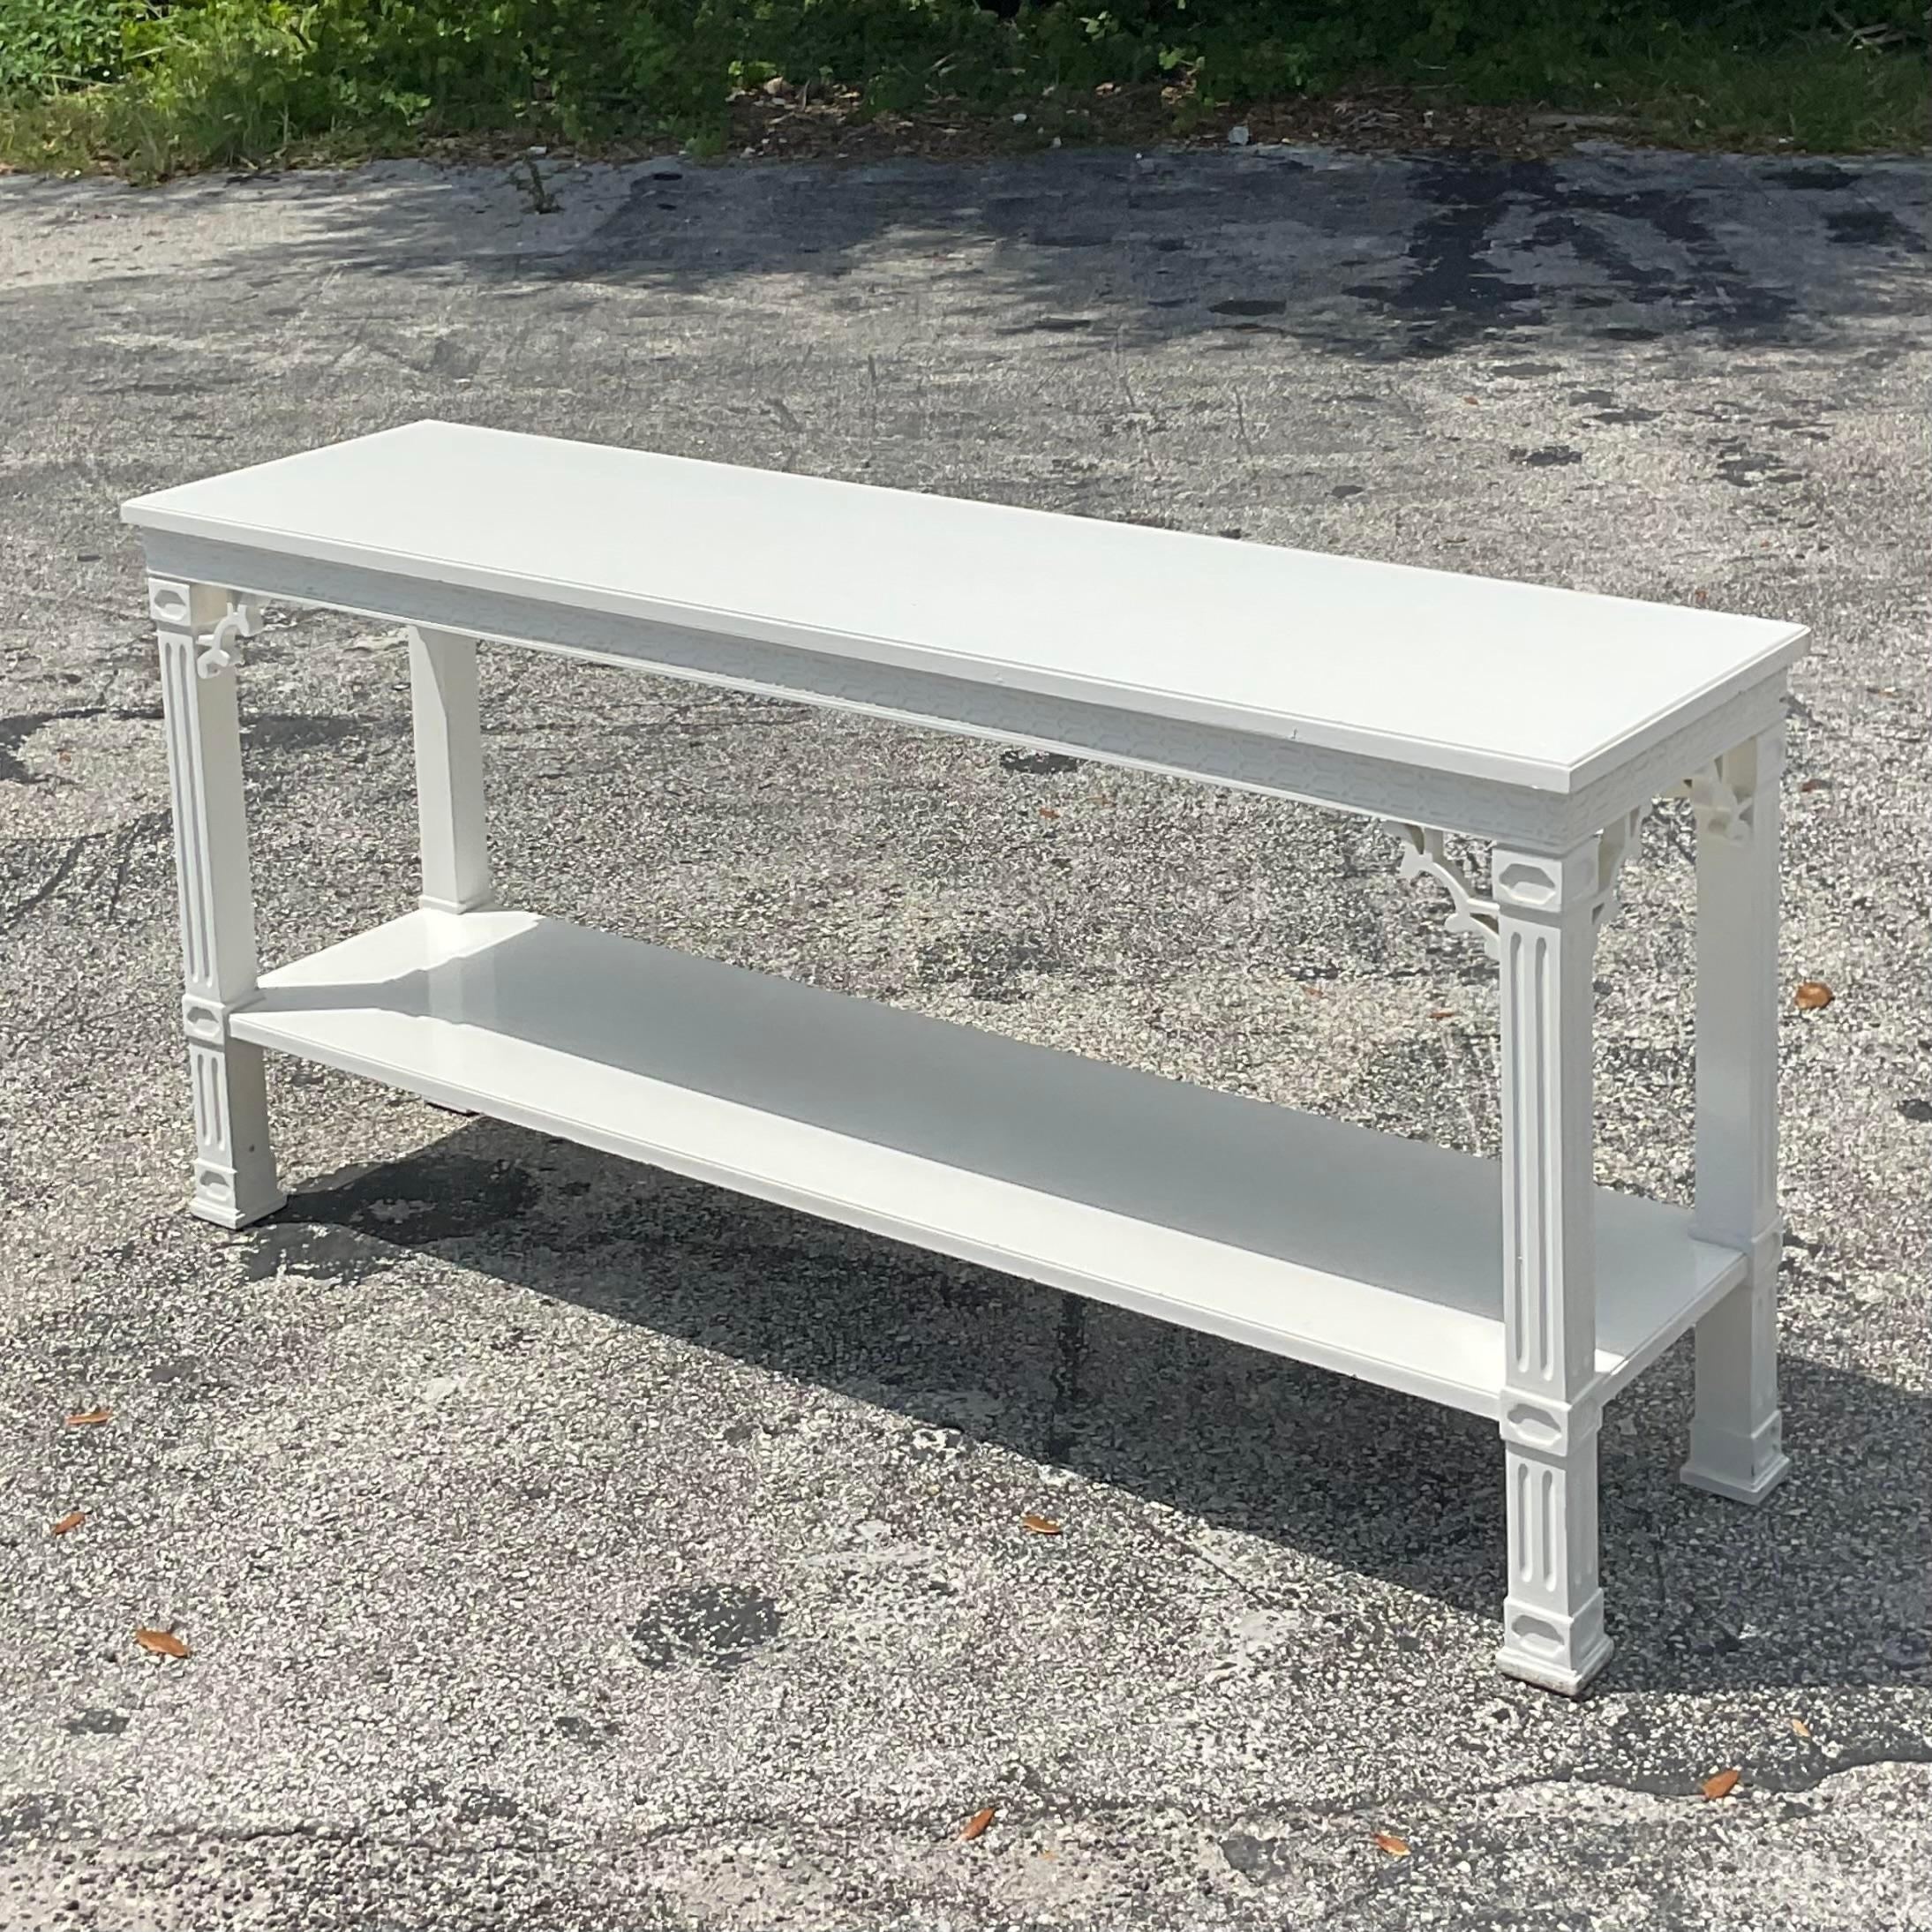 A fabulous vintage Regency console table. Tall and not too deep so it’s perfect for those narrow spaces. Chic semigloss white finish with gorgeous fretwork detail. Two tables available on my page if a pair is needed! Acquired from a Palm Beach